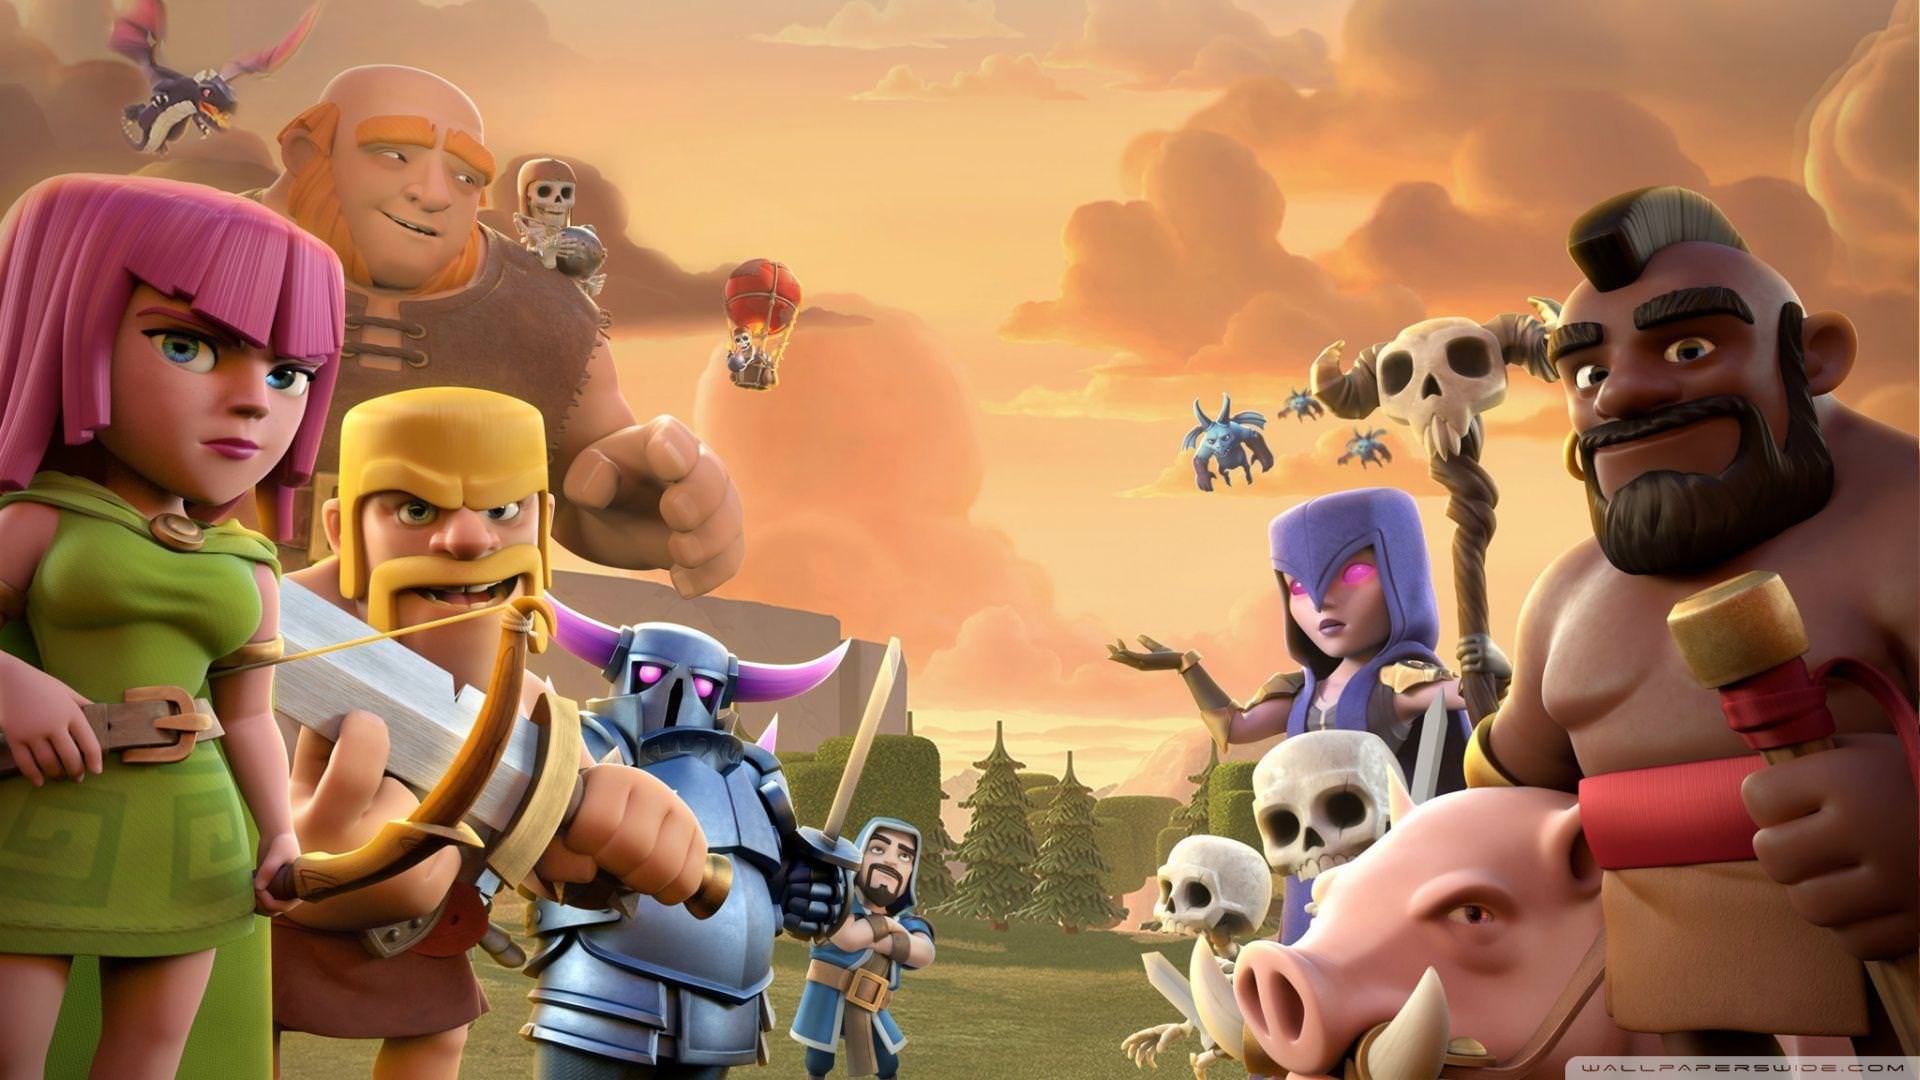 Download Clash Royale Wallpapers 8K Resolution 7680x4320 And 4K Resolution  Wallpaper 